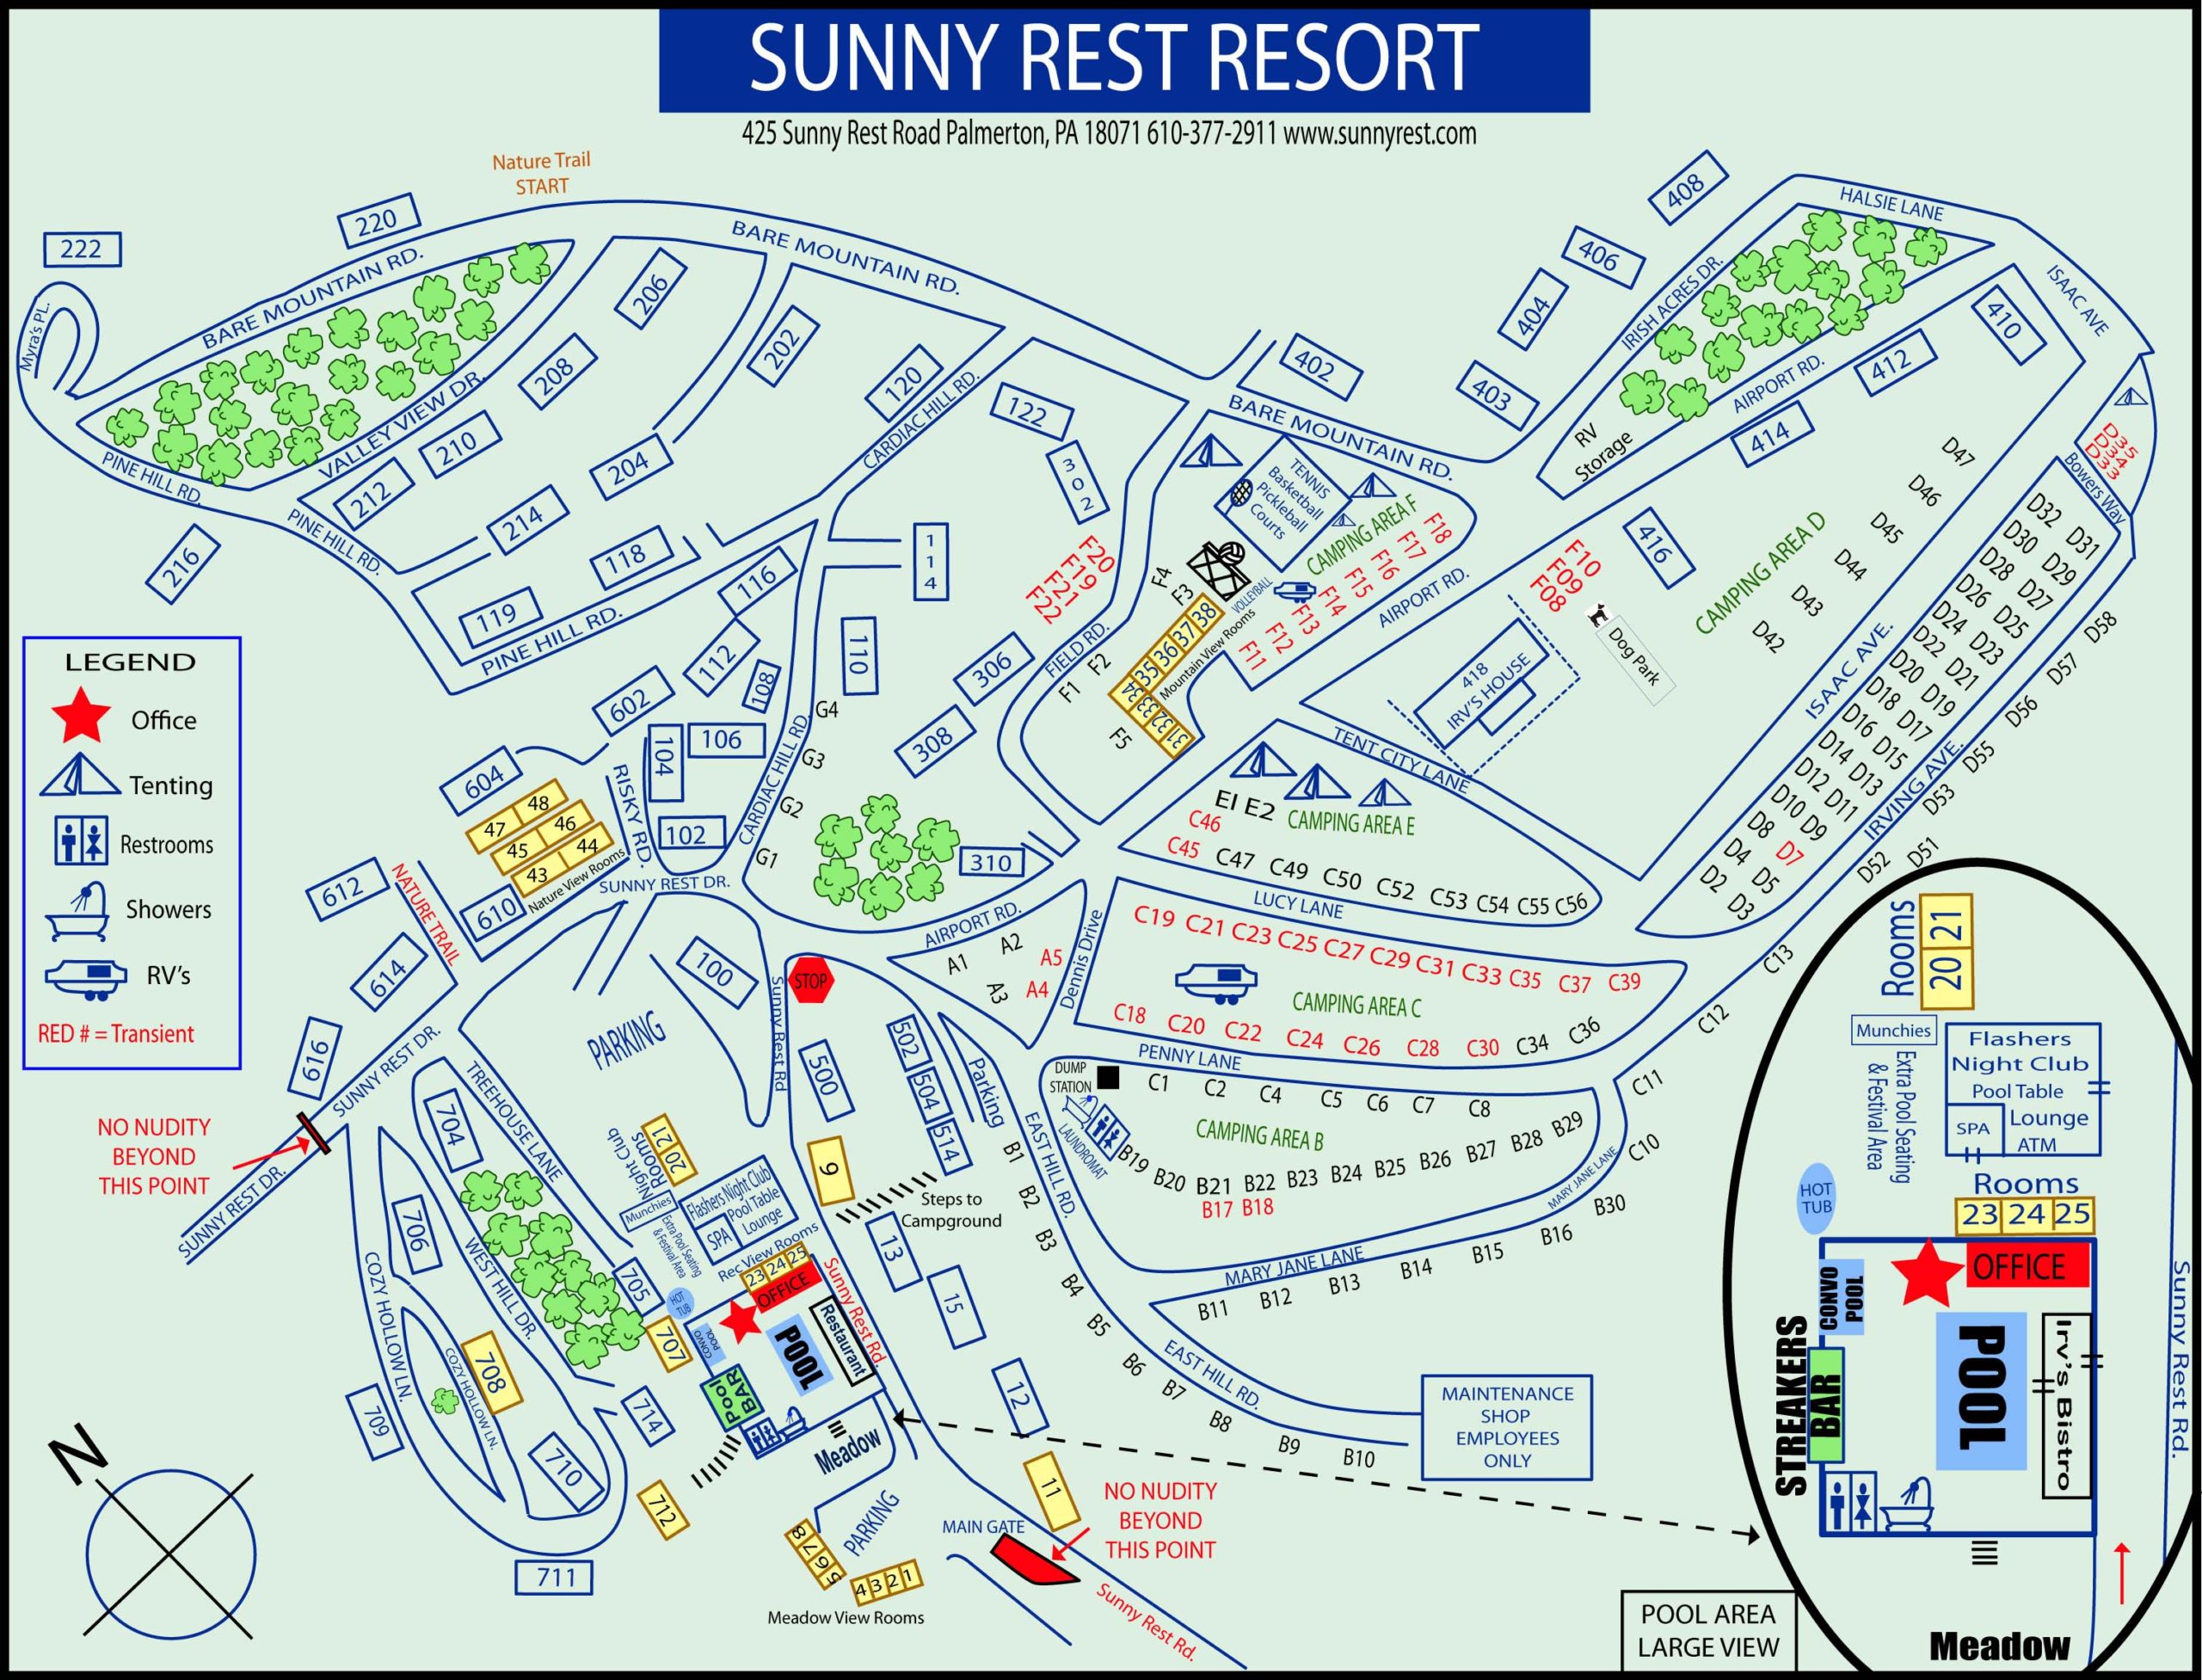 A map of Sunny Rest Resort in Palmerton PA. The map shows locations for all camping areas, rooms, amenities, offices, and borders for nudity. For assistance in navigating to a specific location, please call us at 610-377-2911.